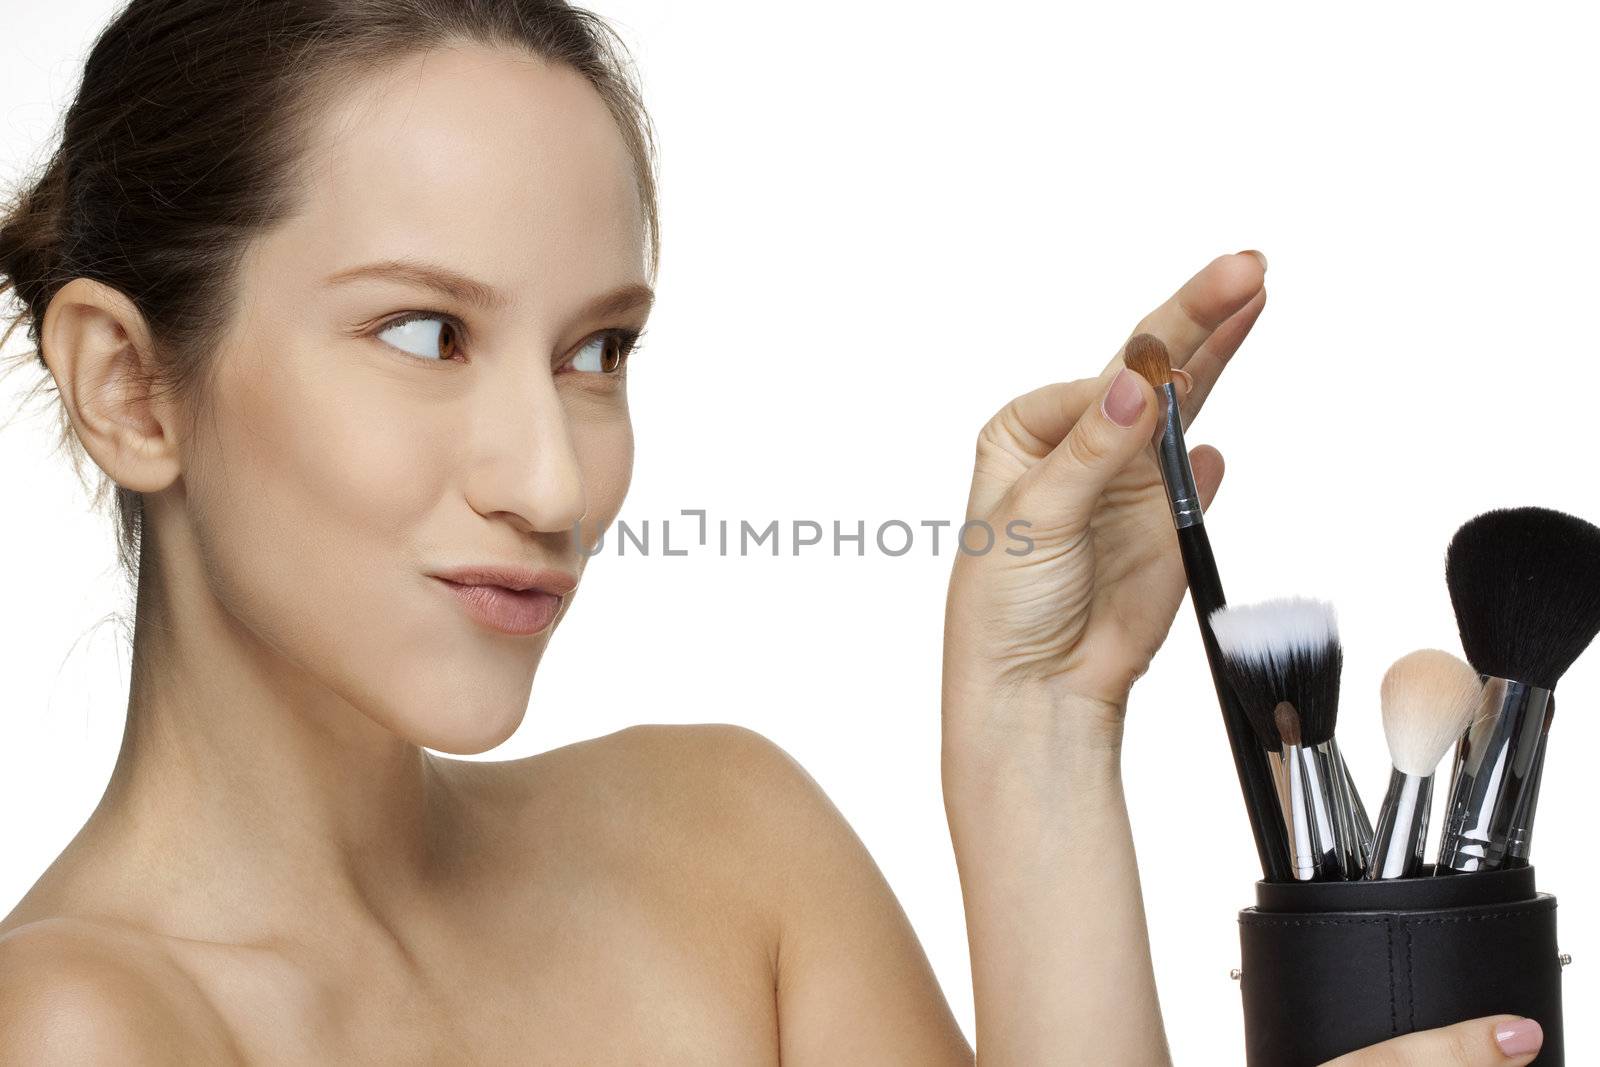 Portrait of a young girl posing with brushes and smiling. Isolated on white background